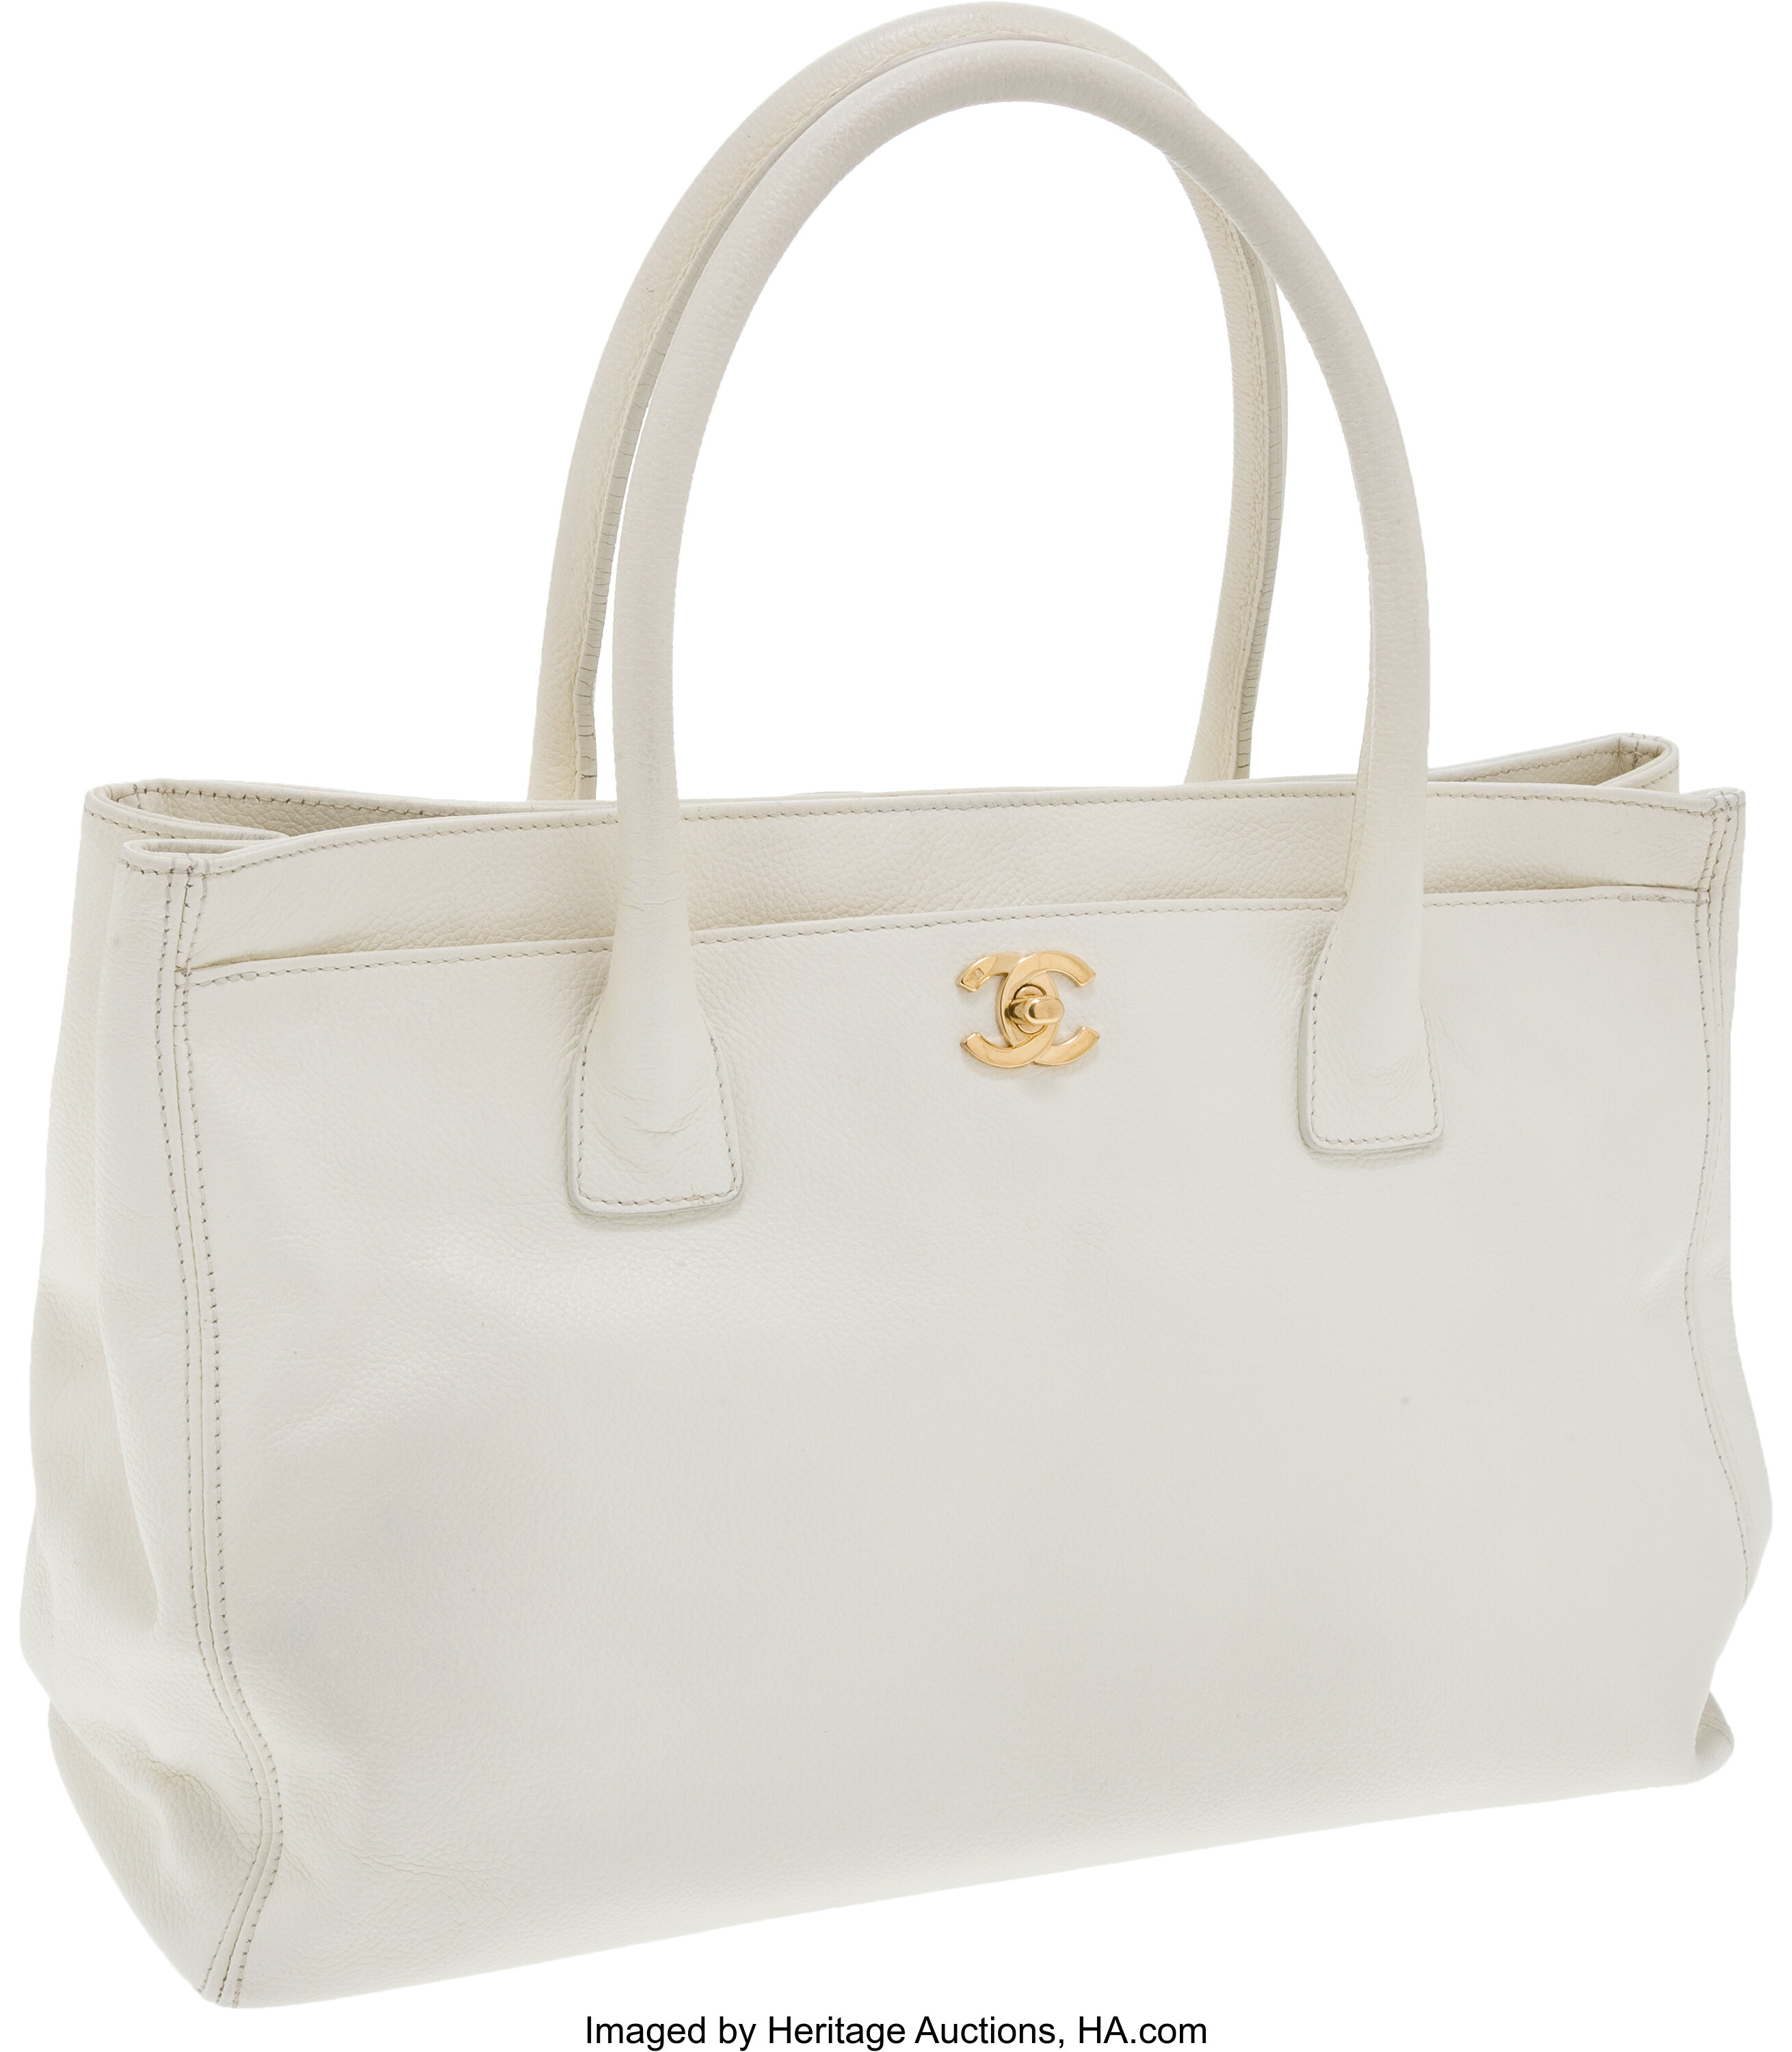 Chanel White Caviar Leather Classic Cerf Tote with Gold Hardware